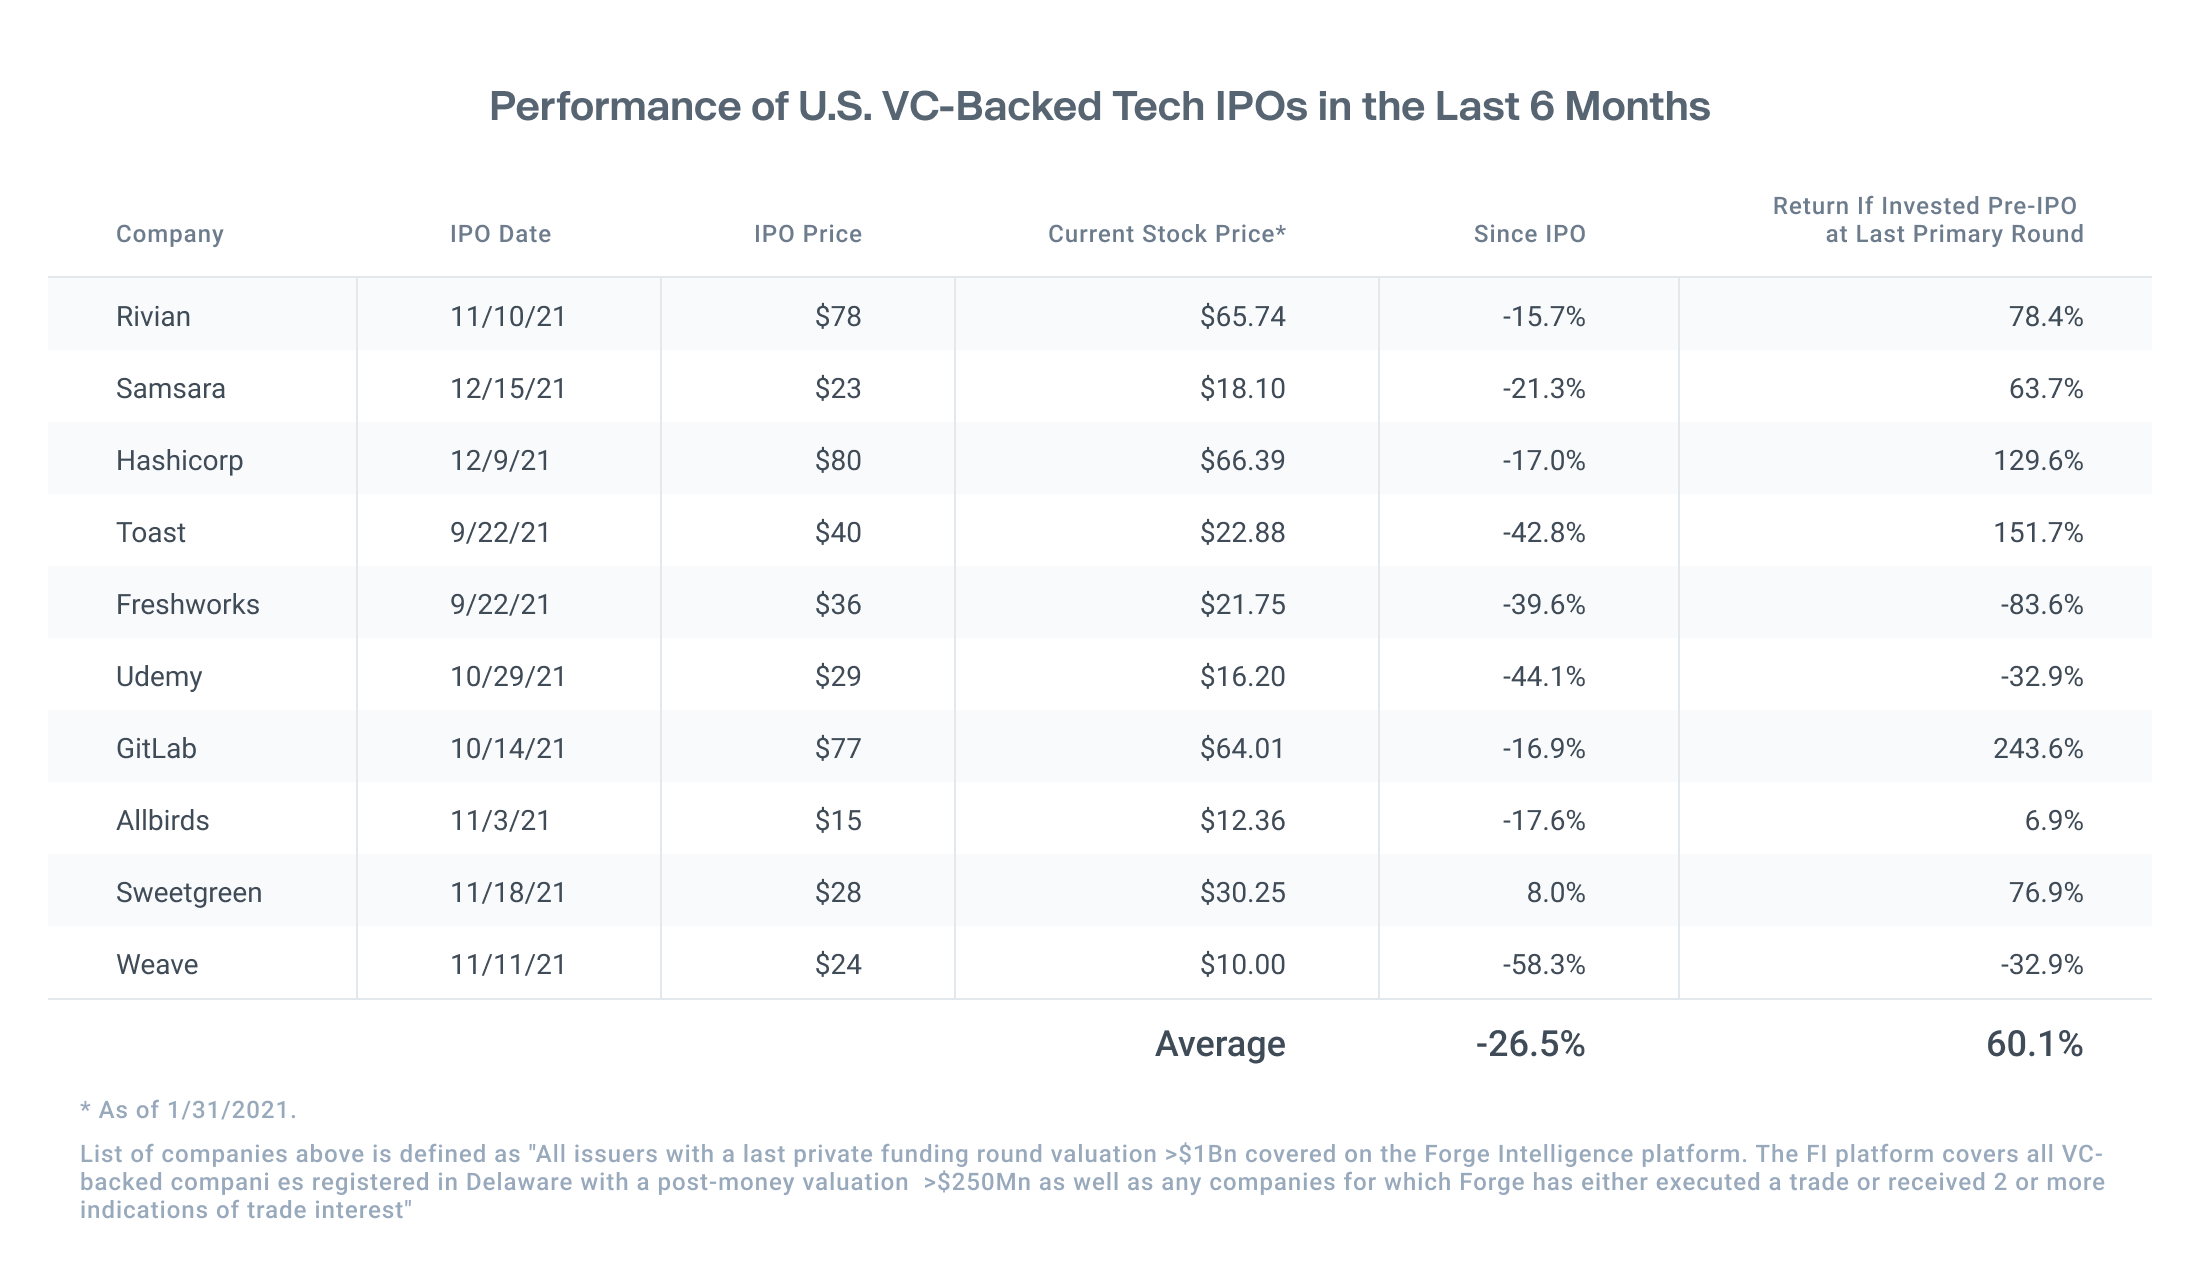 Performance of U.S. VC-Backed Tech IPOs in the Last 6 Months